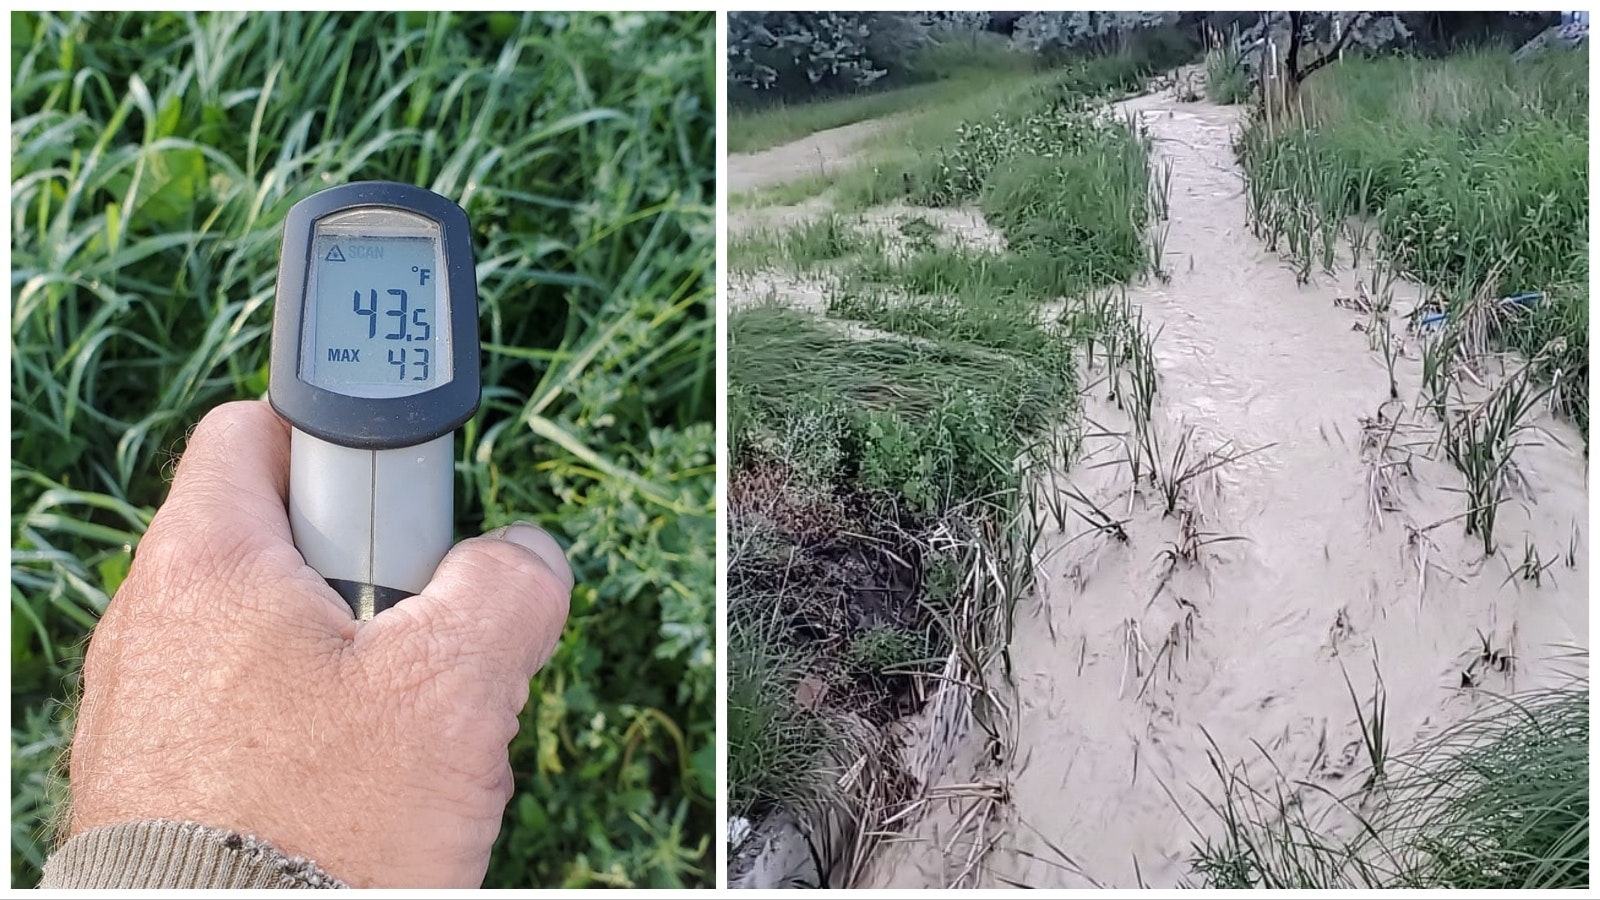 Even by late June, the temperatures in Jay Richard's fields in Worland were well below normal. Coupled with wet conditions, he said some crops may not get enough heat and sun this summer.